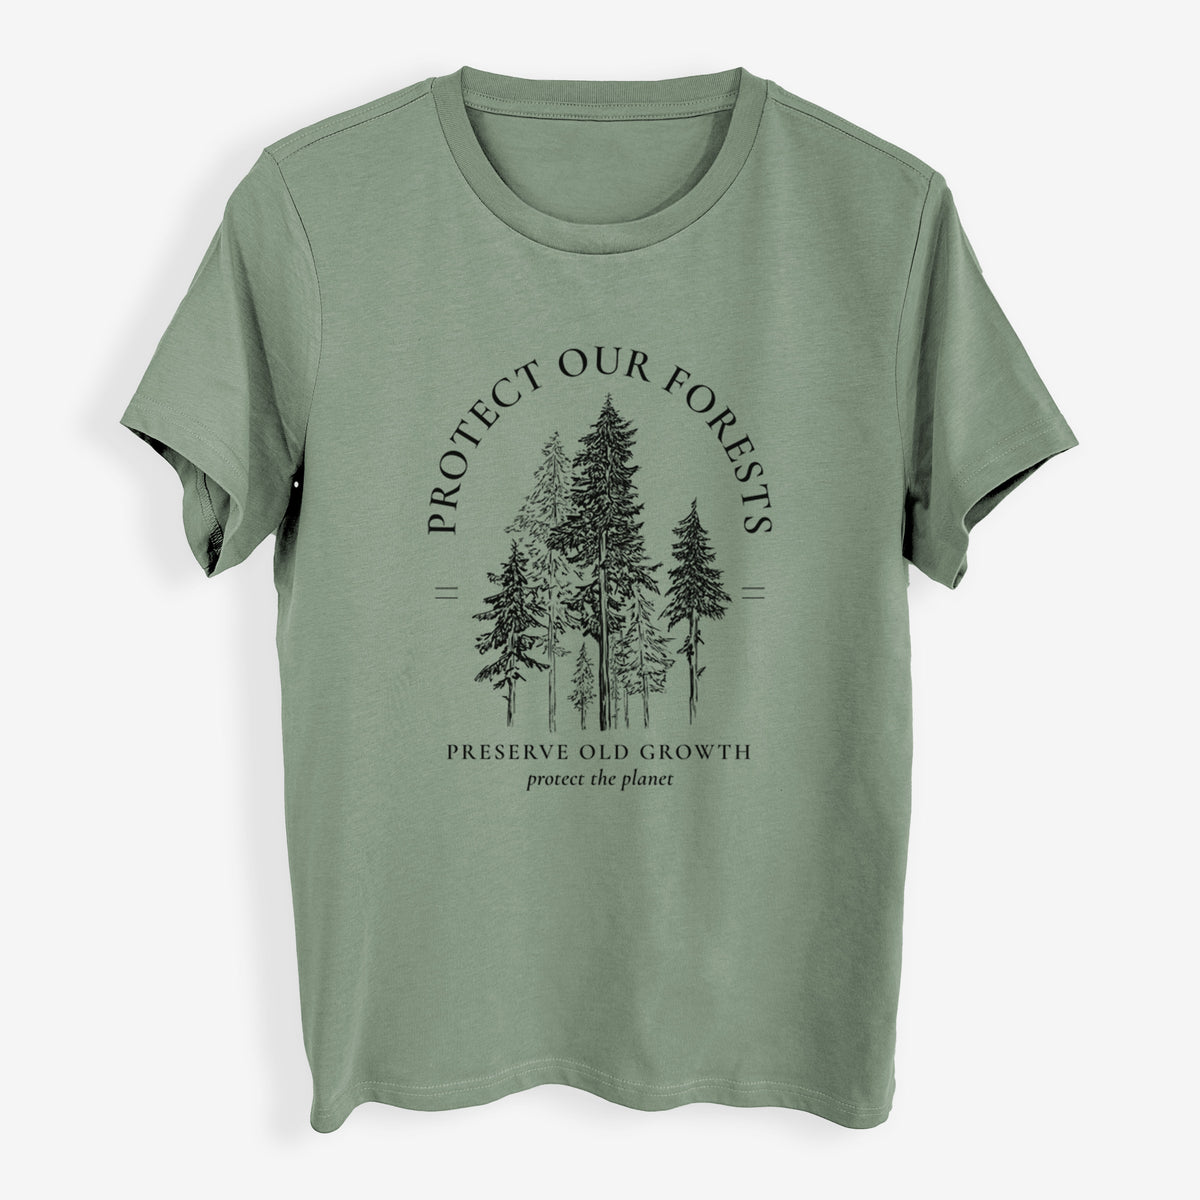 Protect our Forests - Preserve Old Growth - Womens Everyday Maple Tee